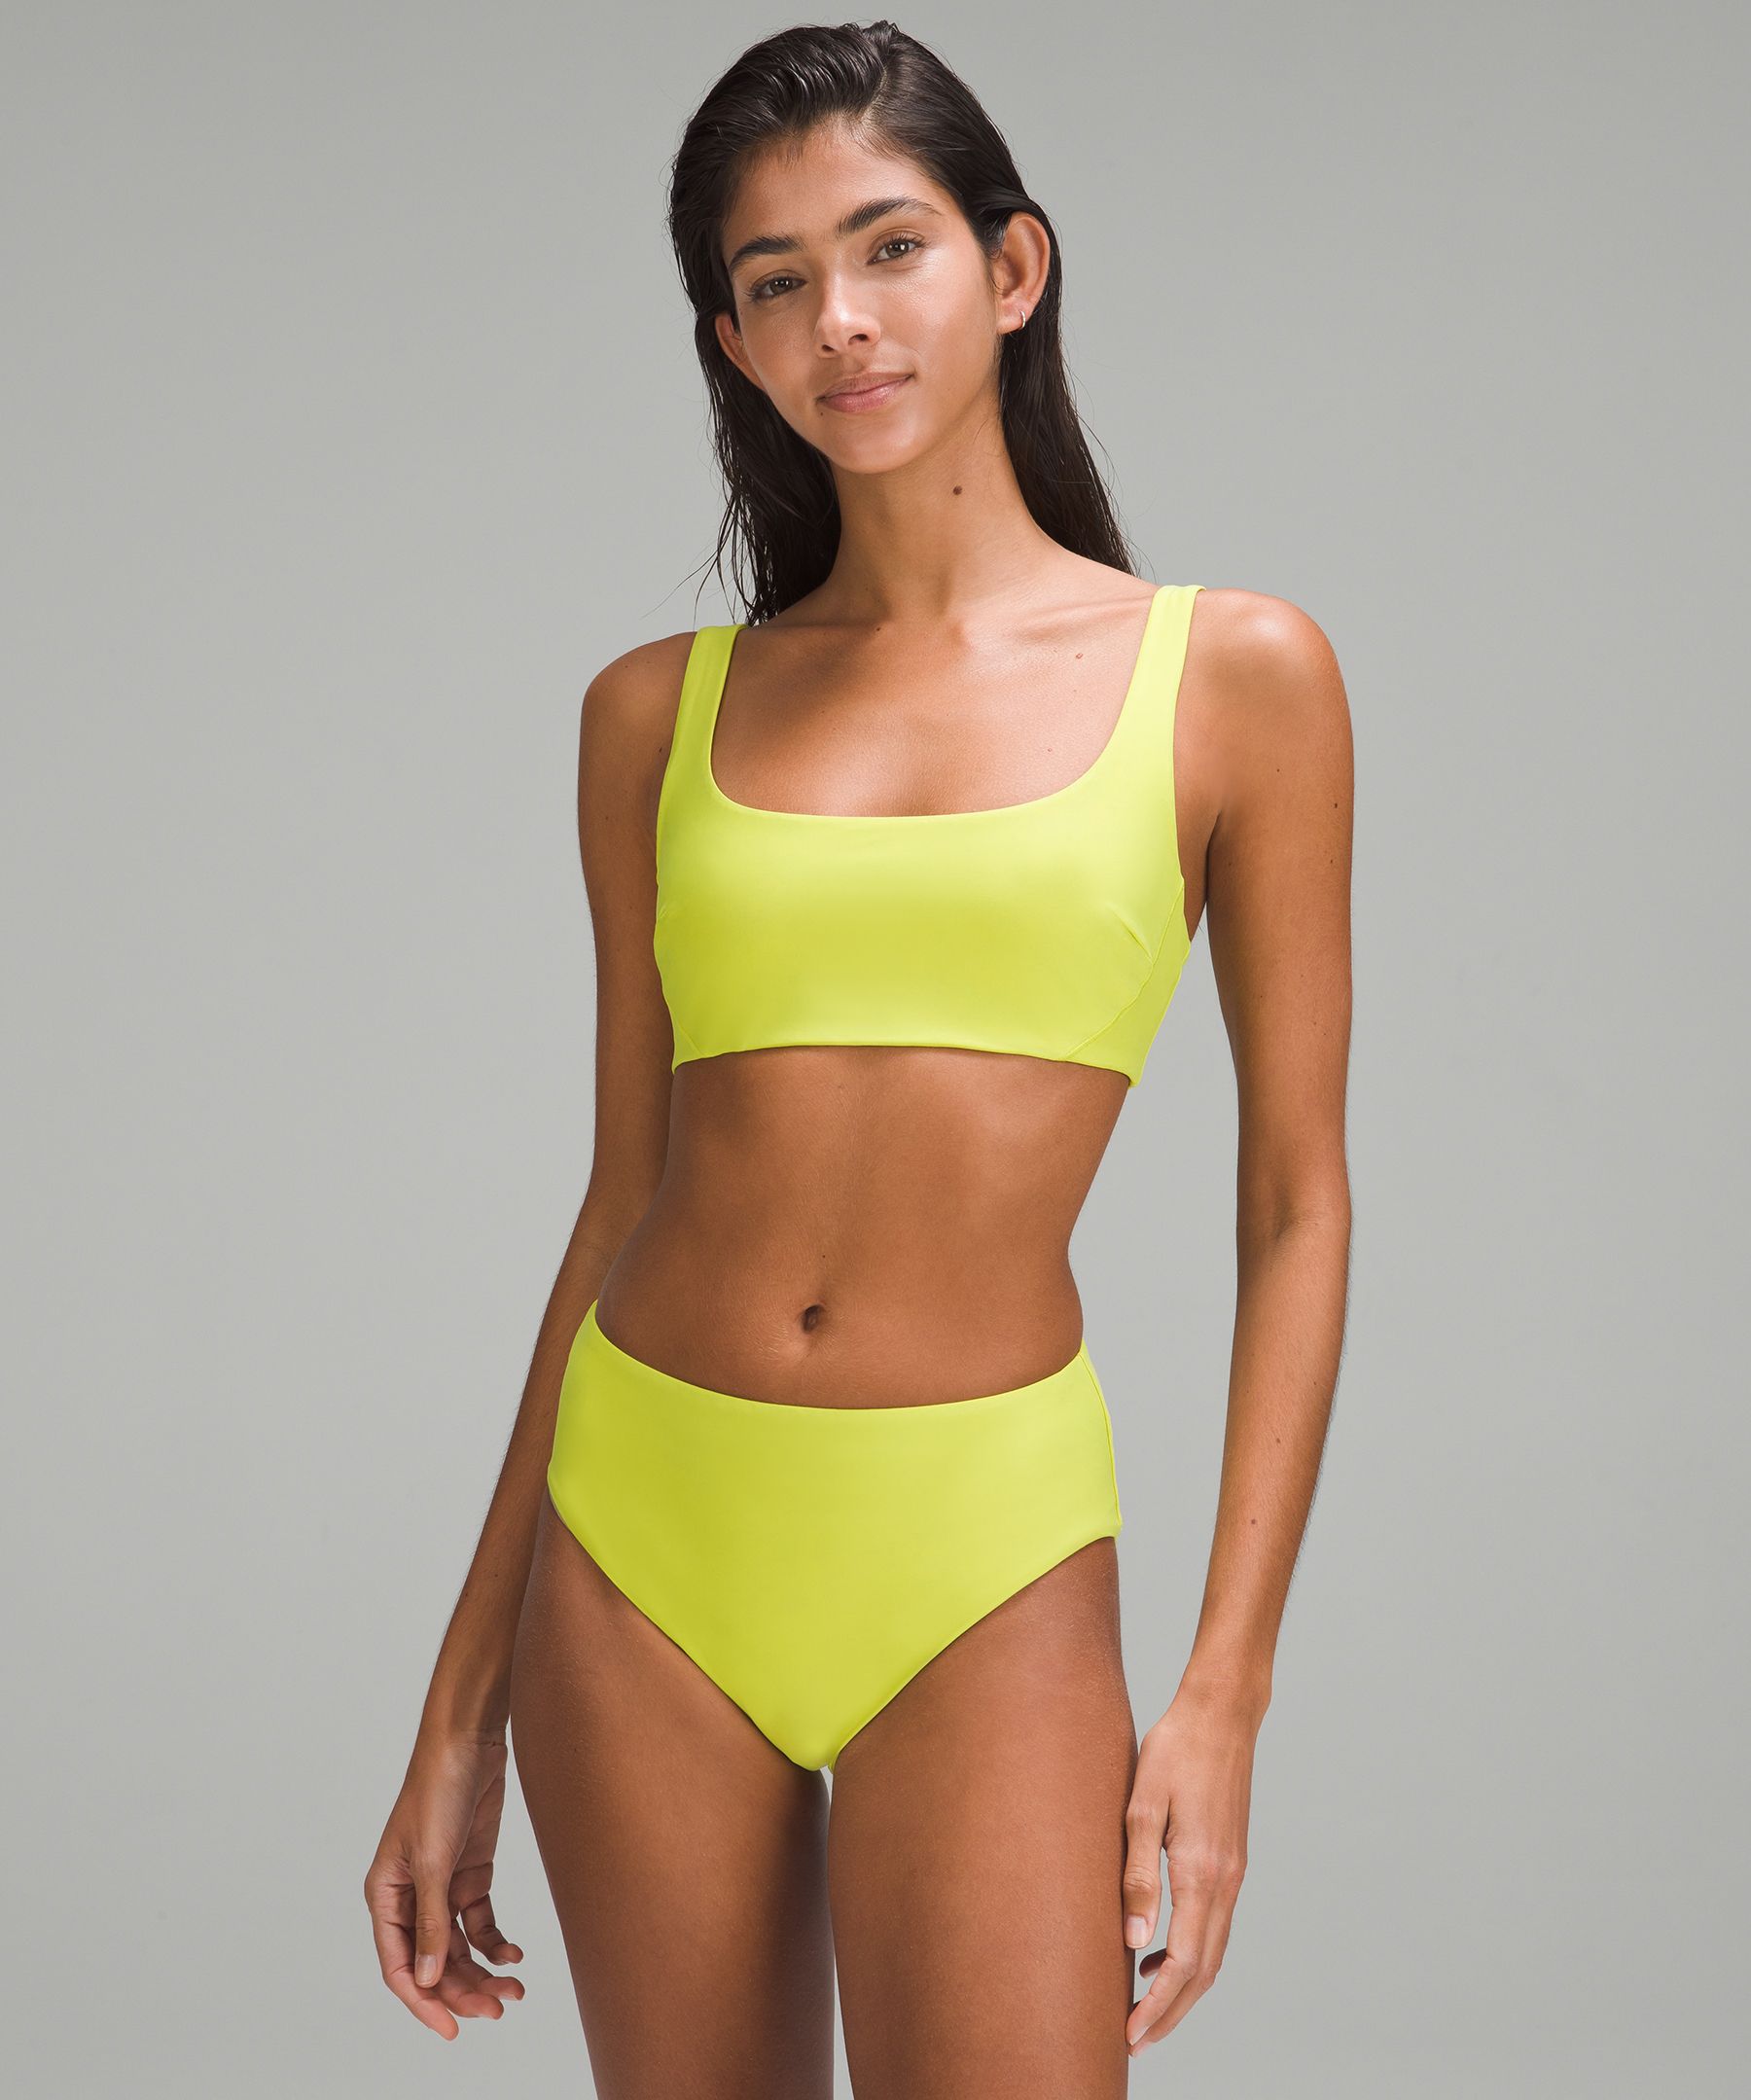 9 New Swimwear Trends From Barbiecore To Mesh Details